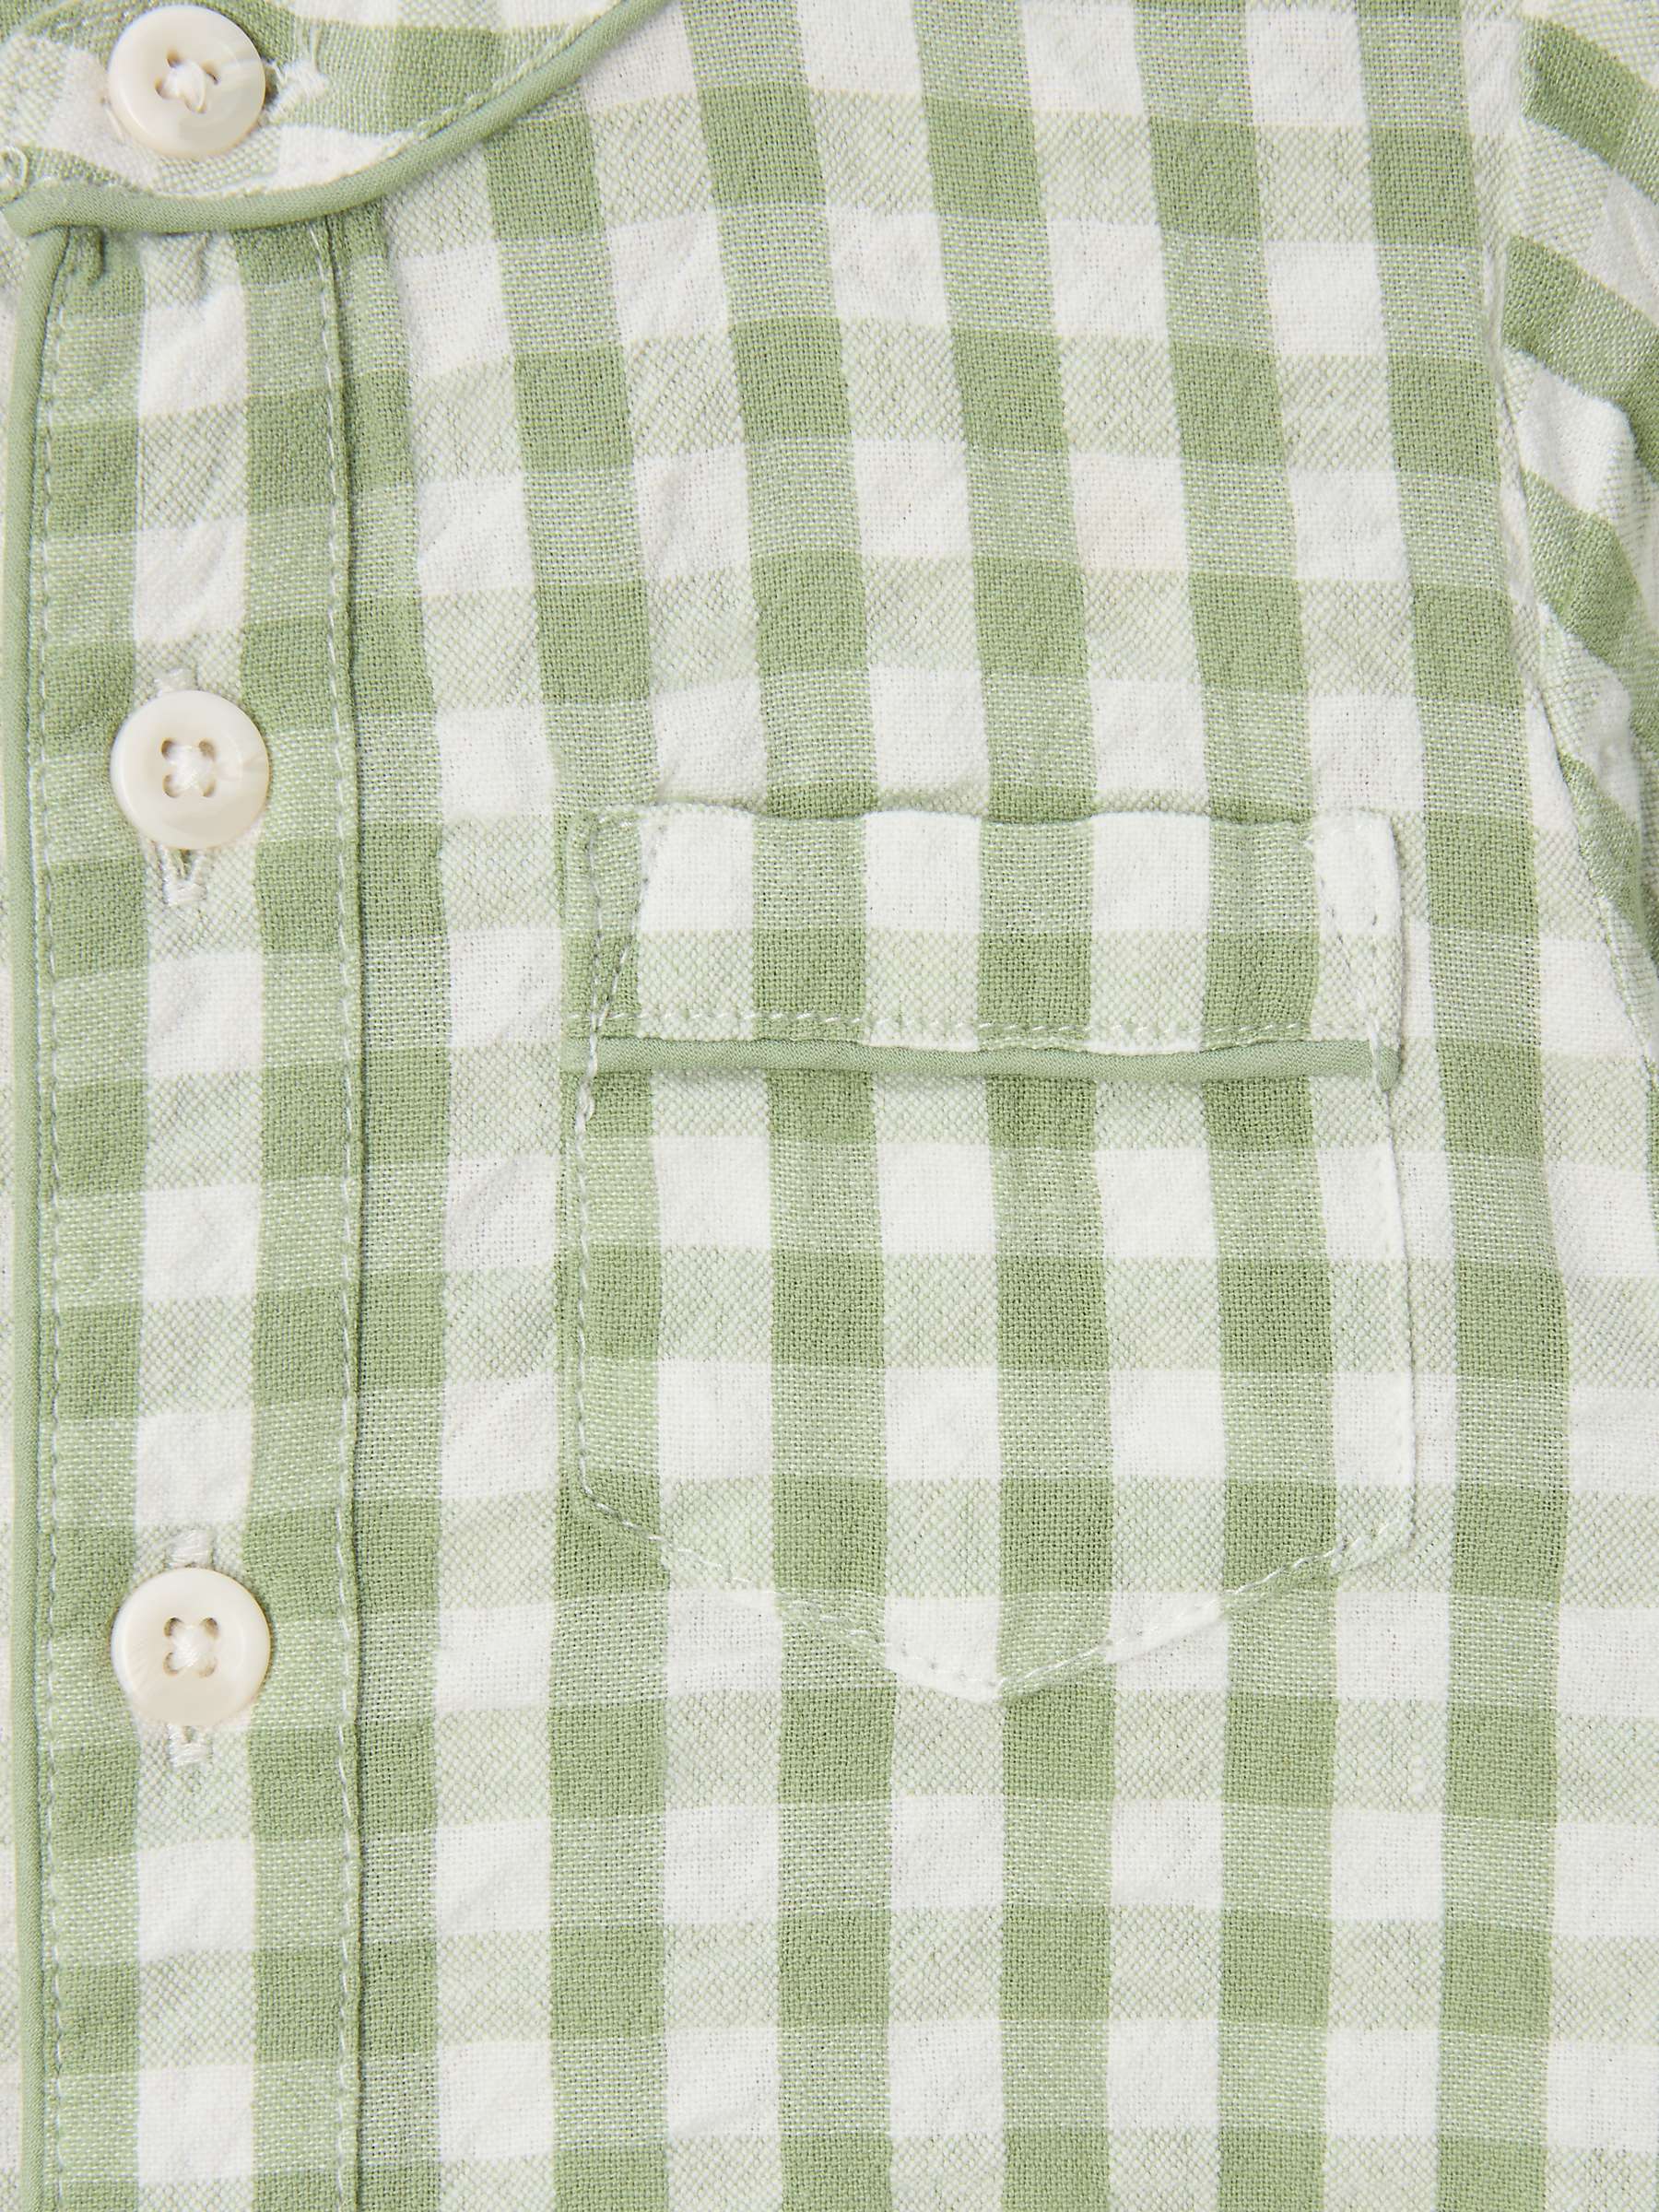 Buy John Lewis Heirloom Collection Baby Cotton Gingham Shirt, Green Online at johnlewis.com